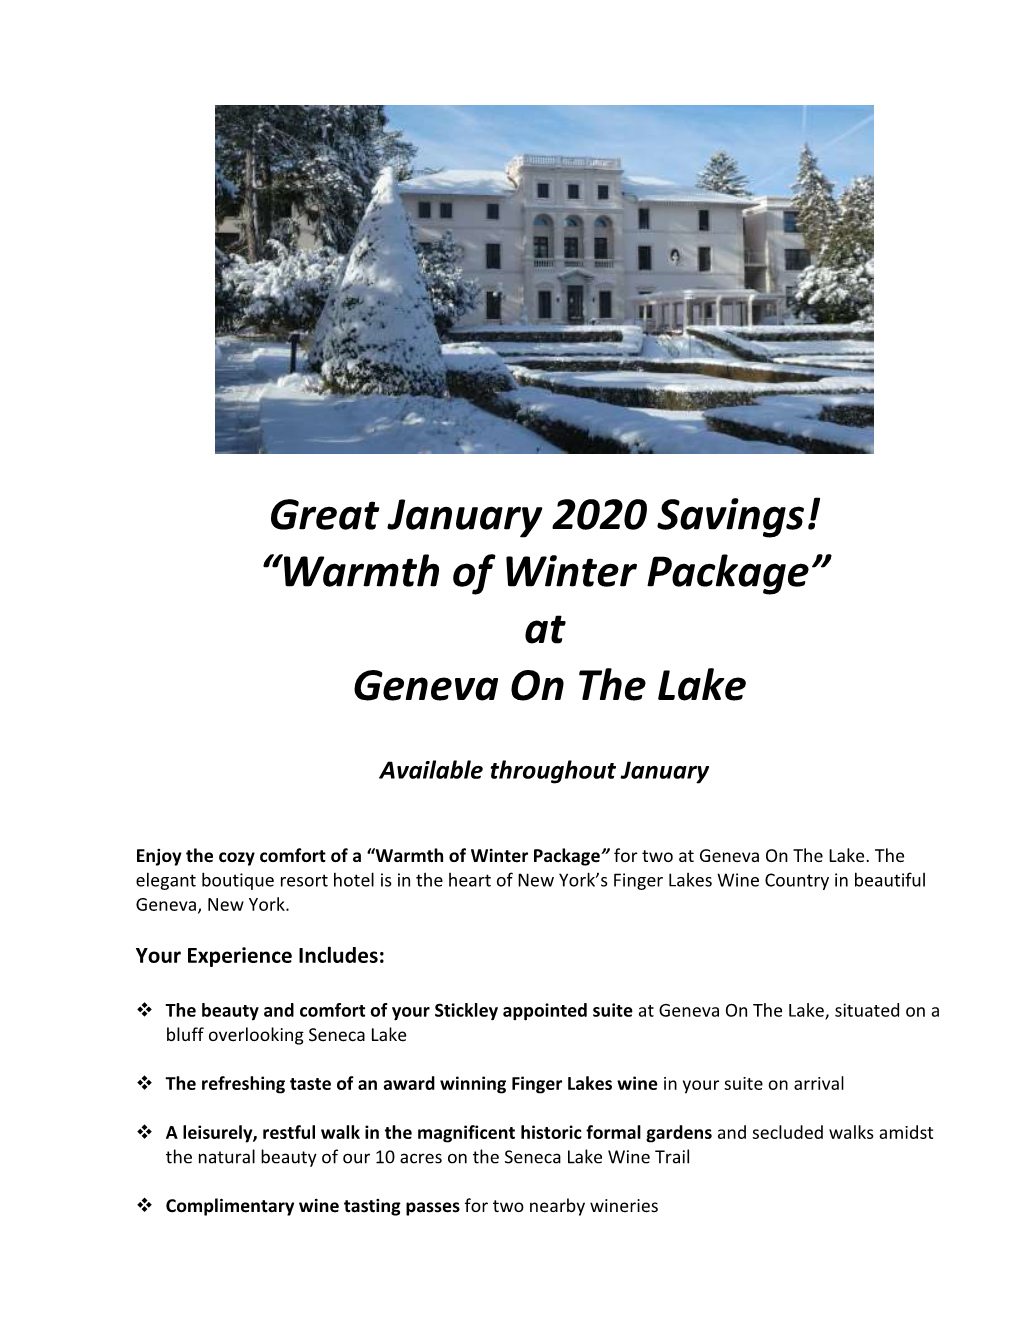 Great January 2020 Savings! “Warmth of Winter Package” at Geneva on the Lake